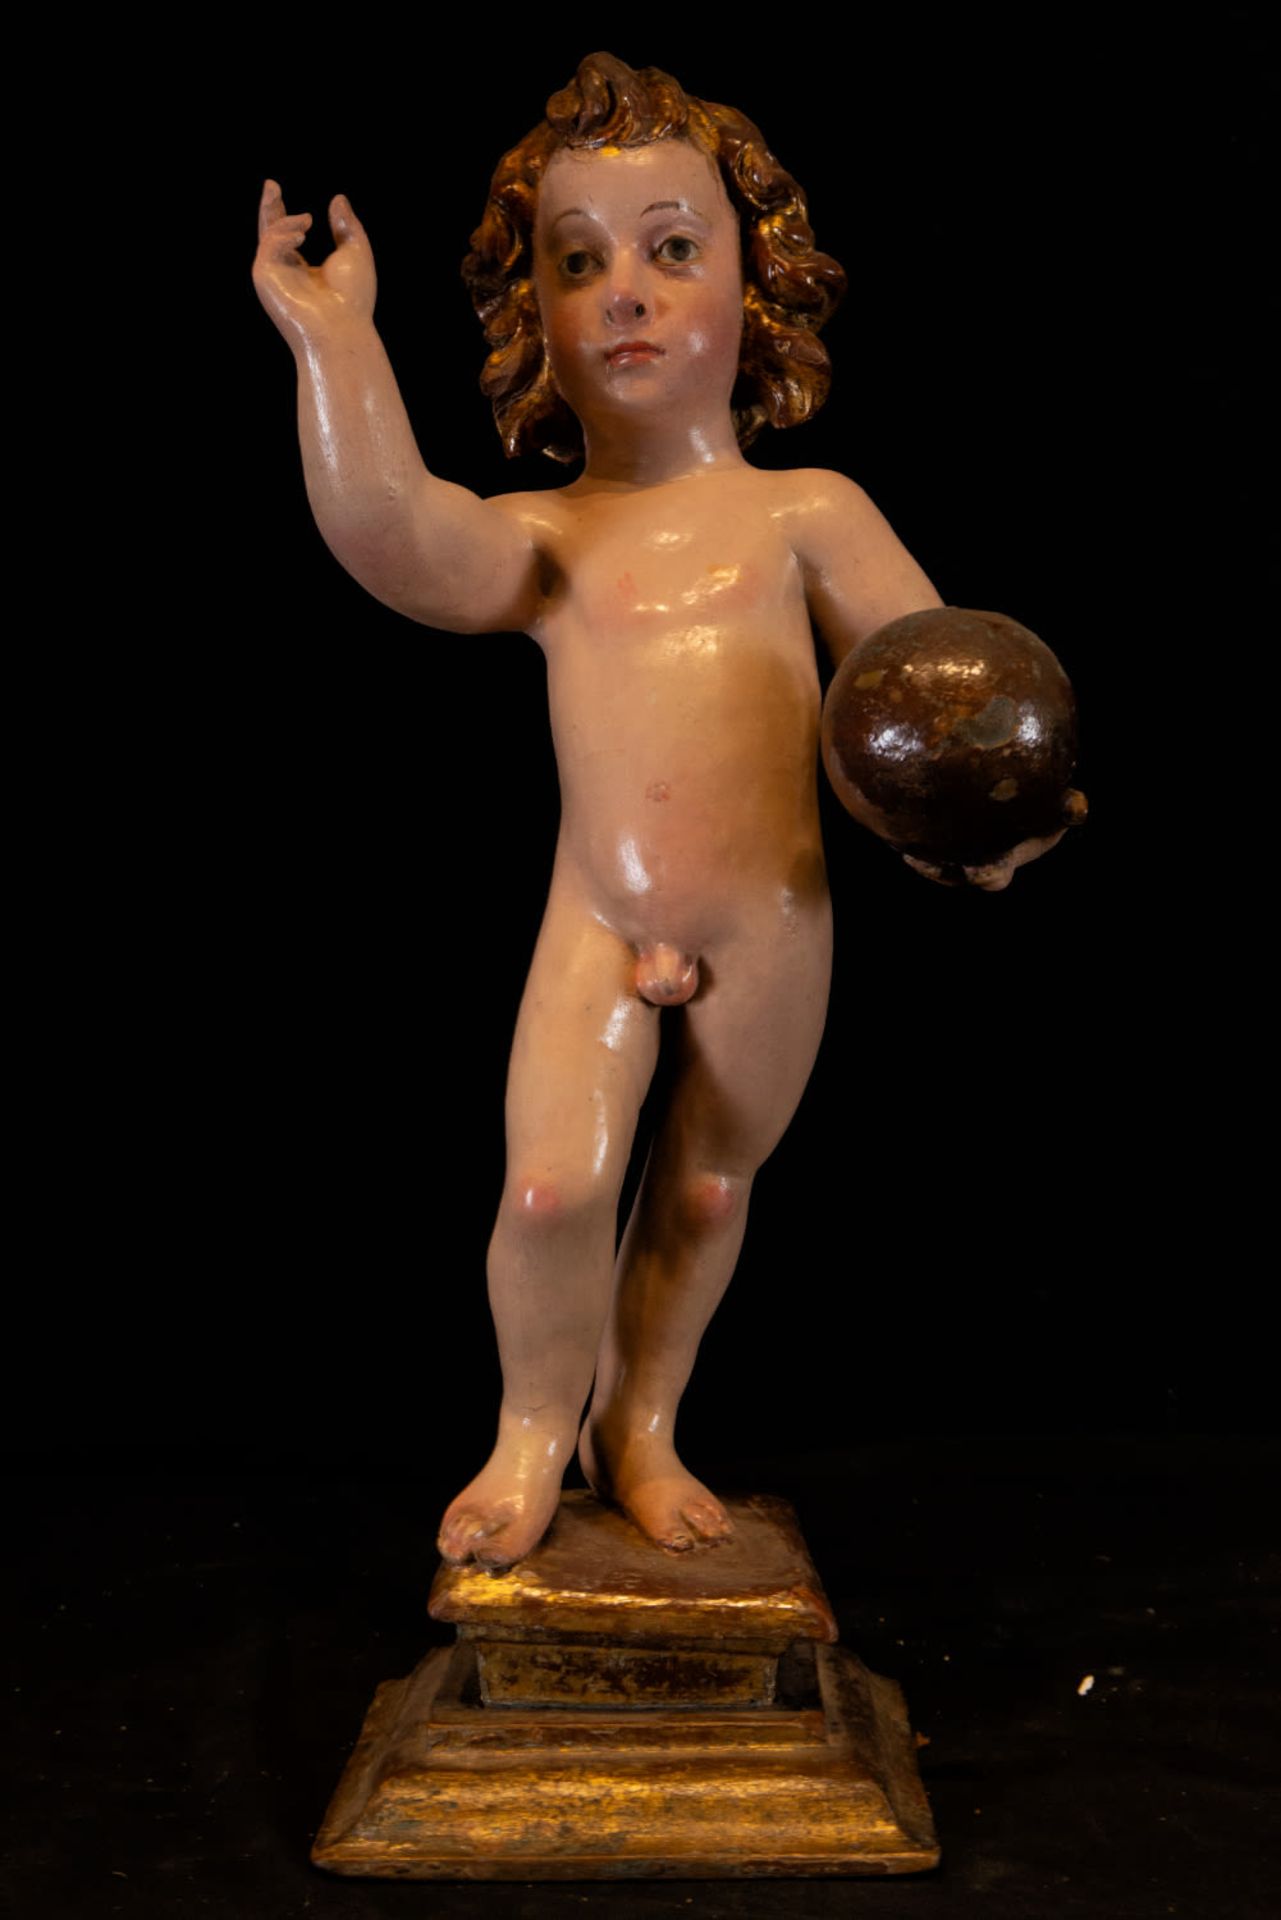 Sculpture of the Child of the Ball, Spanish school, 17th century